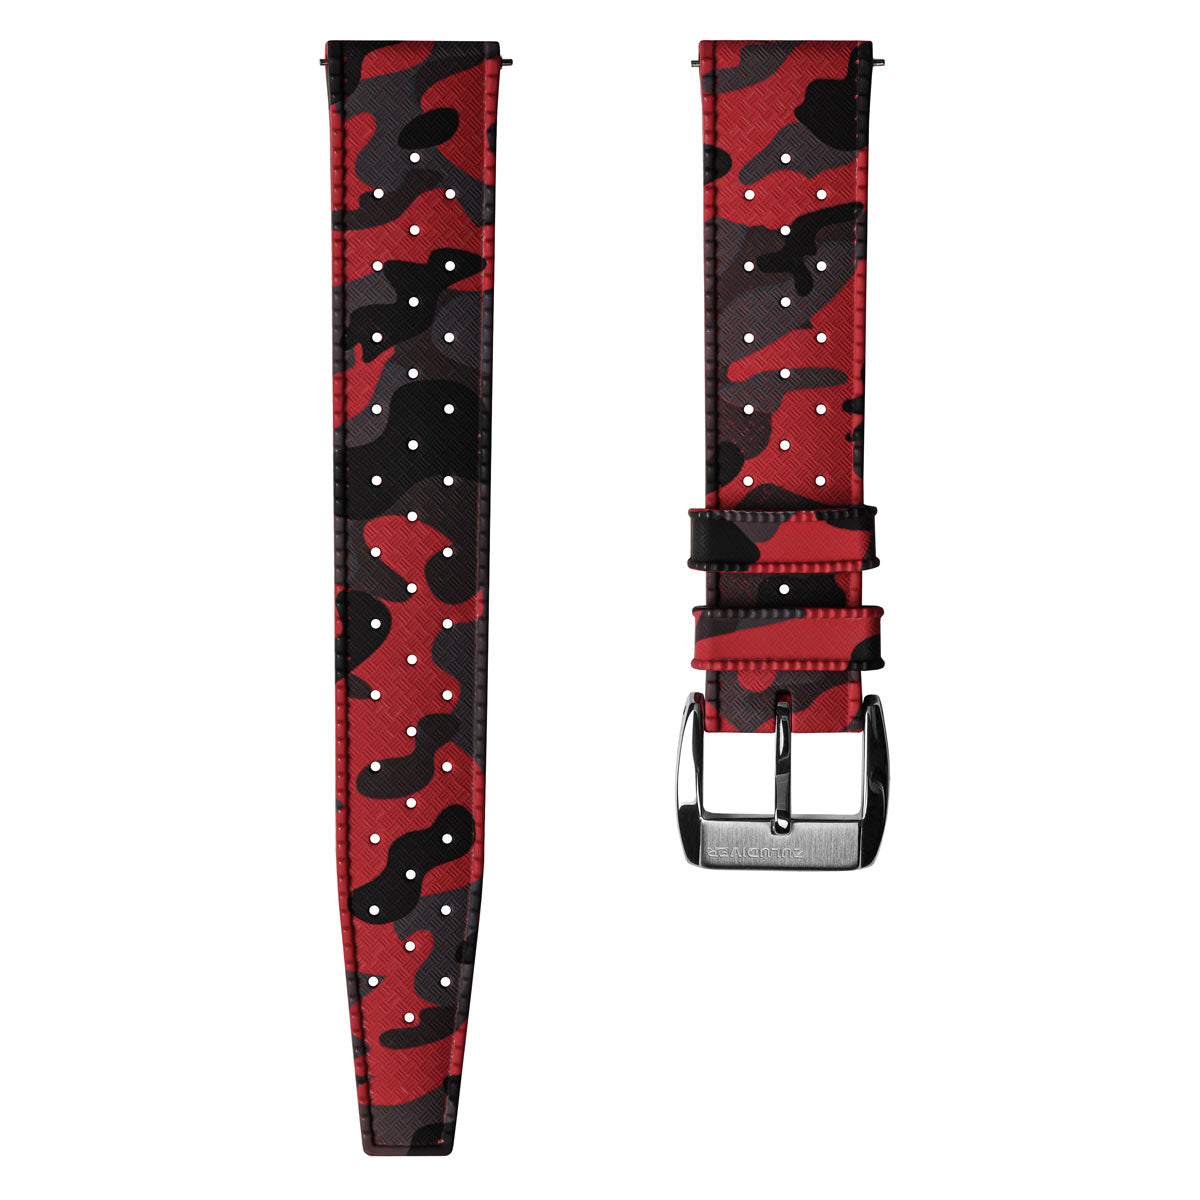 ZULUDIVER Tropical Style Camo Rubber Watch Strap - Red